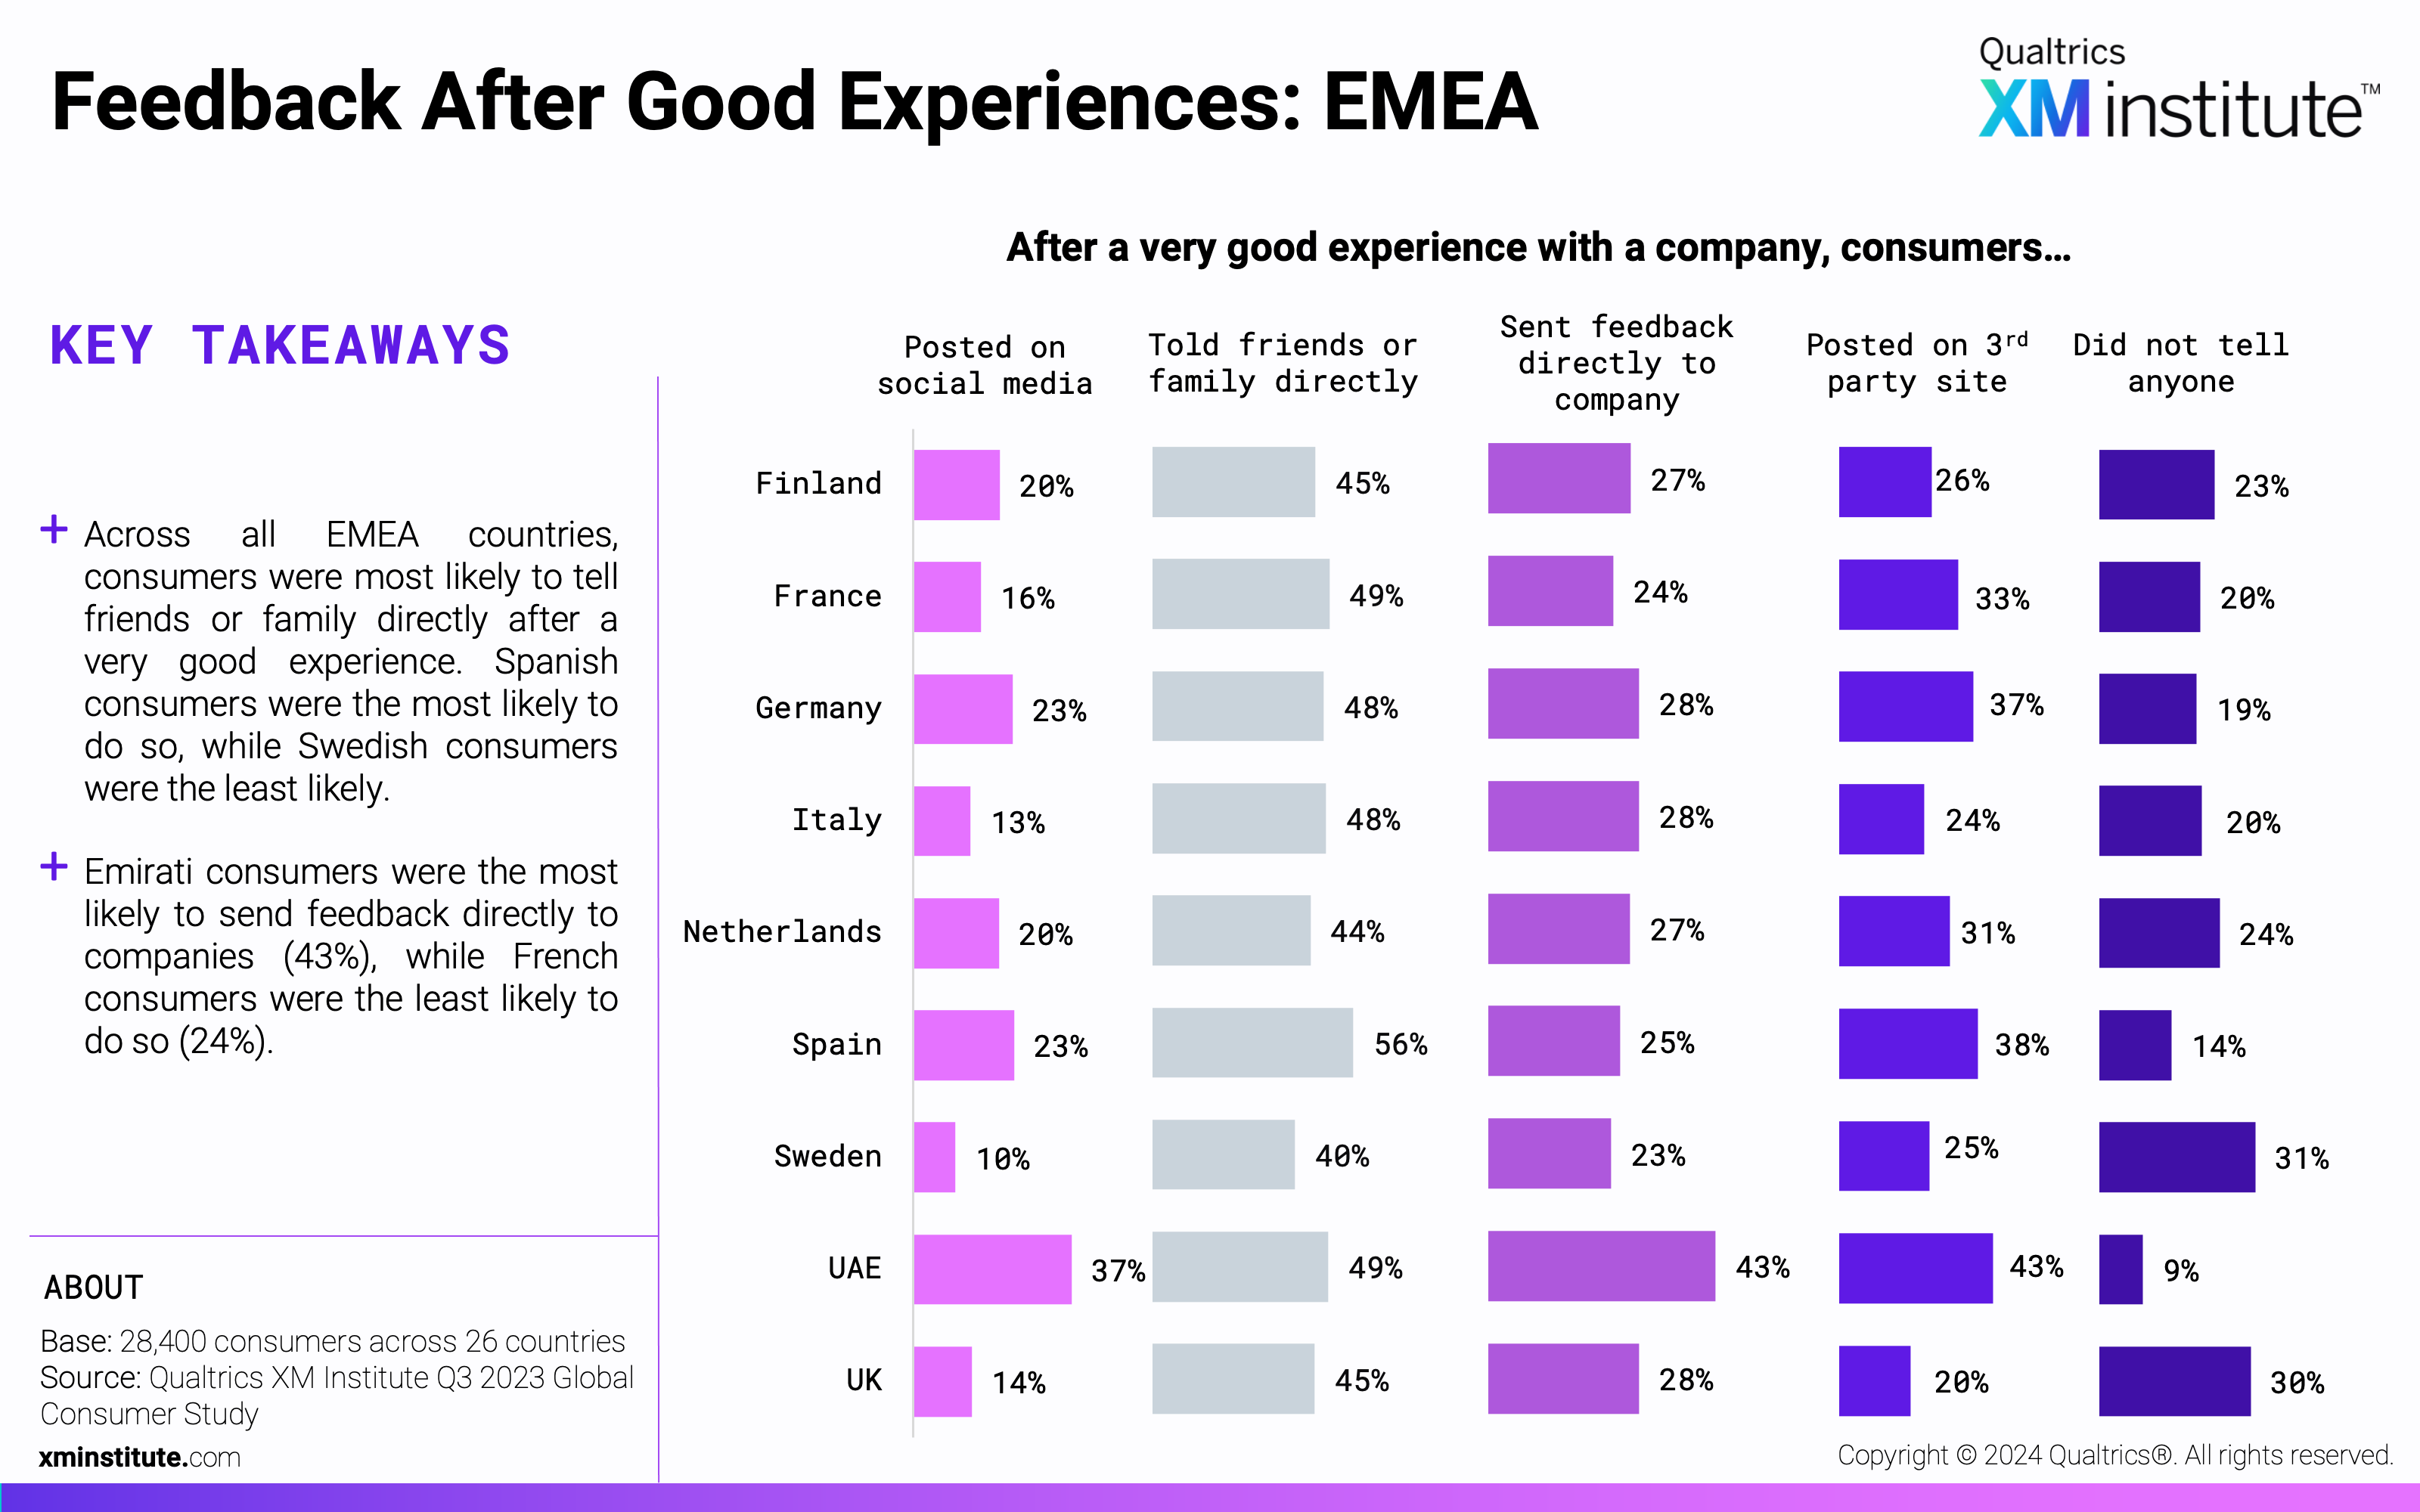 These charts show the percentage of consumers from each country that shared feedback using each method after a very good experience with a company.